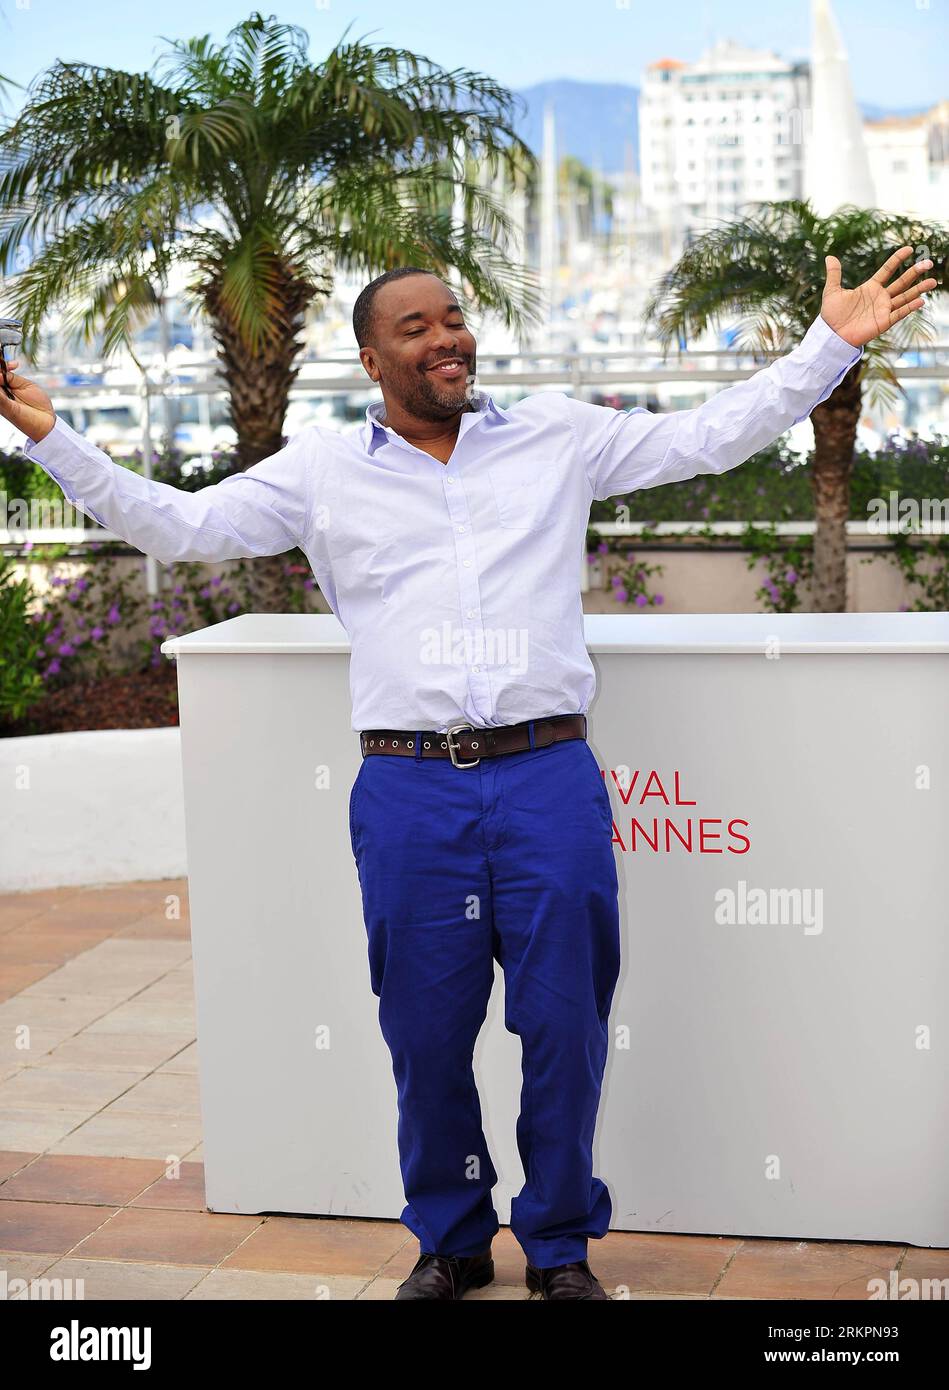 Bildnummer: 58030794  Datum: 24.05.2012  Copyright: imago/Xinhua (120524) -- CANNES, May 24, 2012 (Xinhua) -- Director Lee Daniels poses during a photocall for his film The Paperboy at the 65th Cannes Film Festival, in Cannes, southern France, May 24, 2012. (Xinhua/Ye Pingfan)(srb) FRANCE-CANNES-FILM FESTIVAL-PHOTOCALL-THE PAPERBOY PUBLICATIONxNOTxINxCHN Kultur Entertainment People Film 65. Internationale Filmfestspiele Cannes x0x xkg 2012 hoch      58030794 Date 24 05 2012 Copyright Imago XINHUA  Cannes May 24 2012 XINHUA Director Lee Daniels Poses during a photo call for His Film The Paperbo Stock Photo